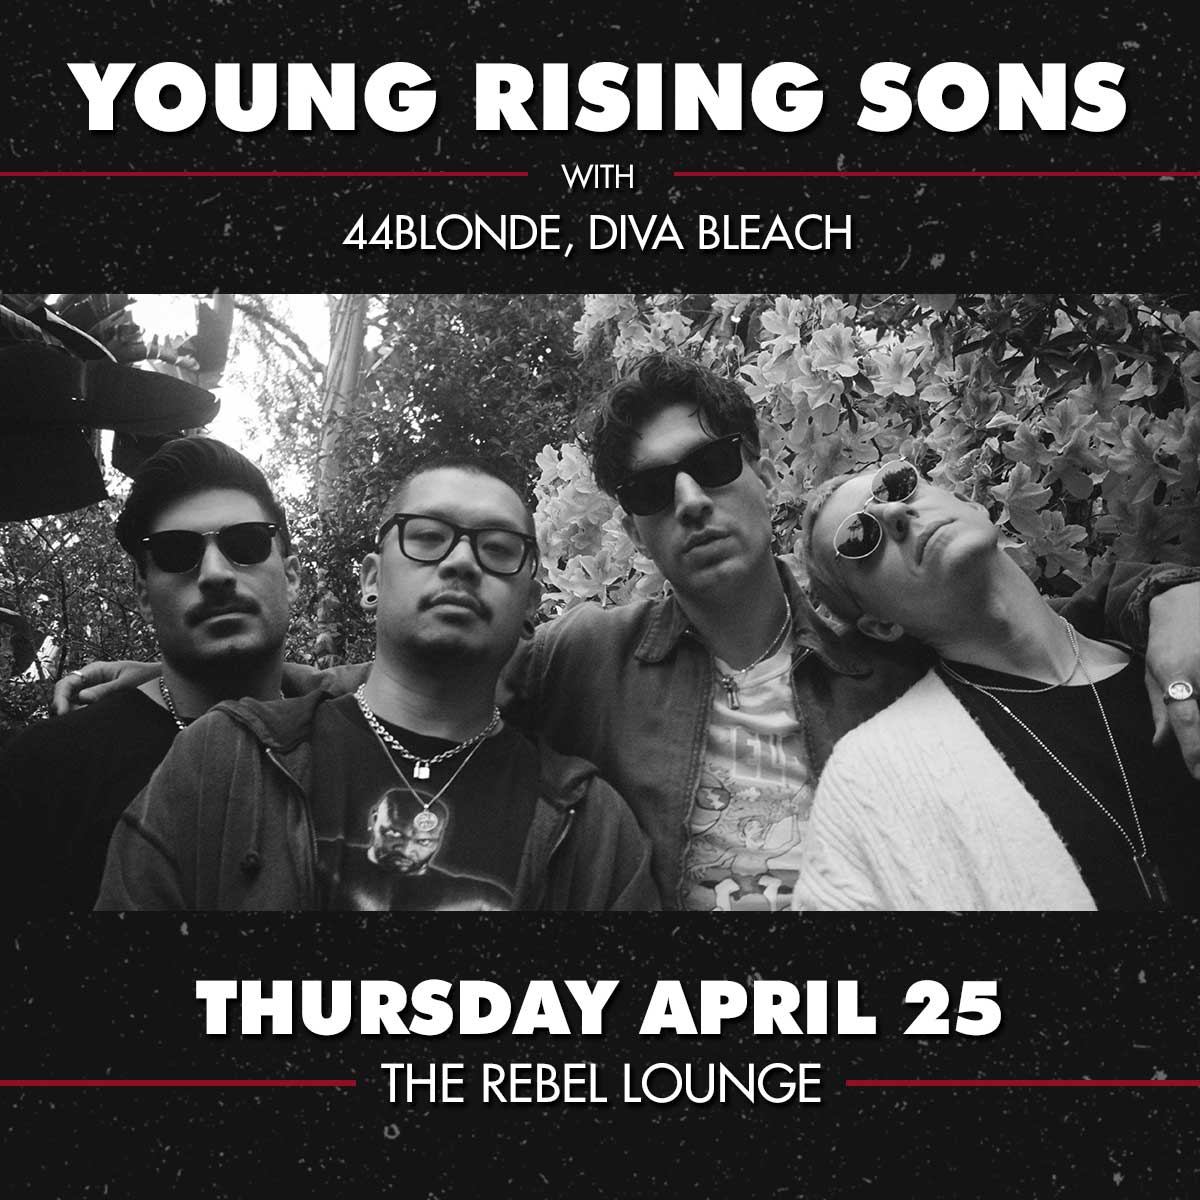 YOUNG RISING SONS